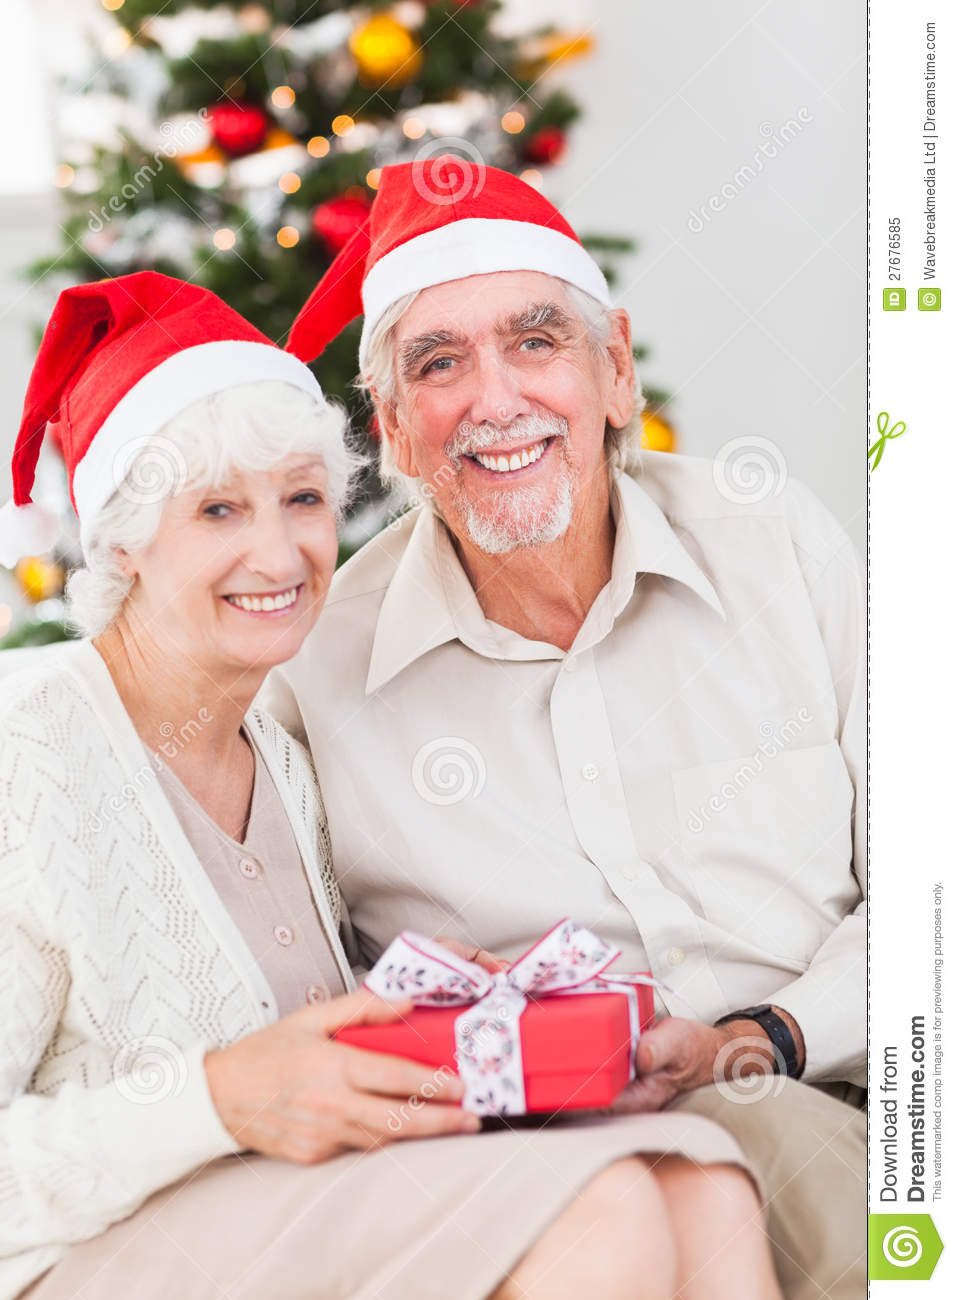 Christmas Gift Ideas For Older Couple
 Smiling Old Couple Swapping Christmas Gifts Stock Image